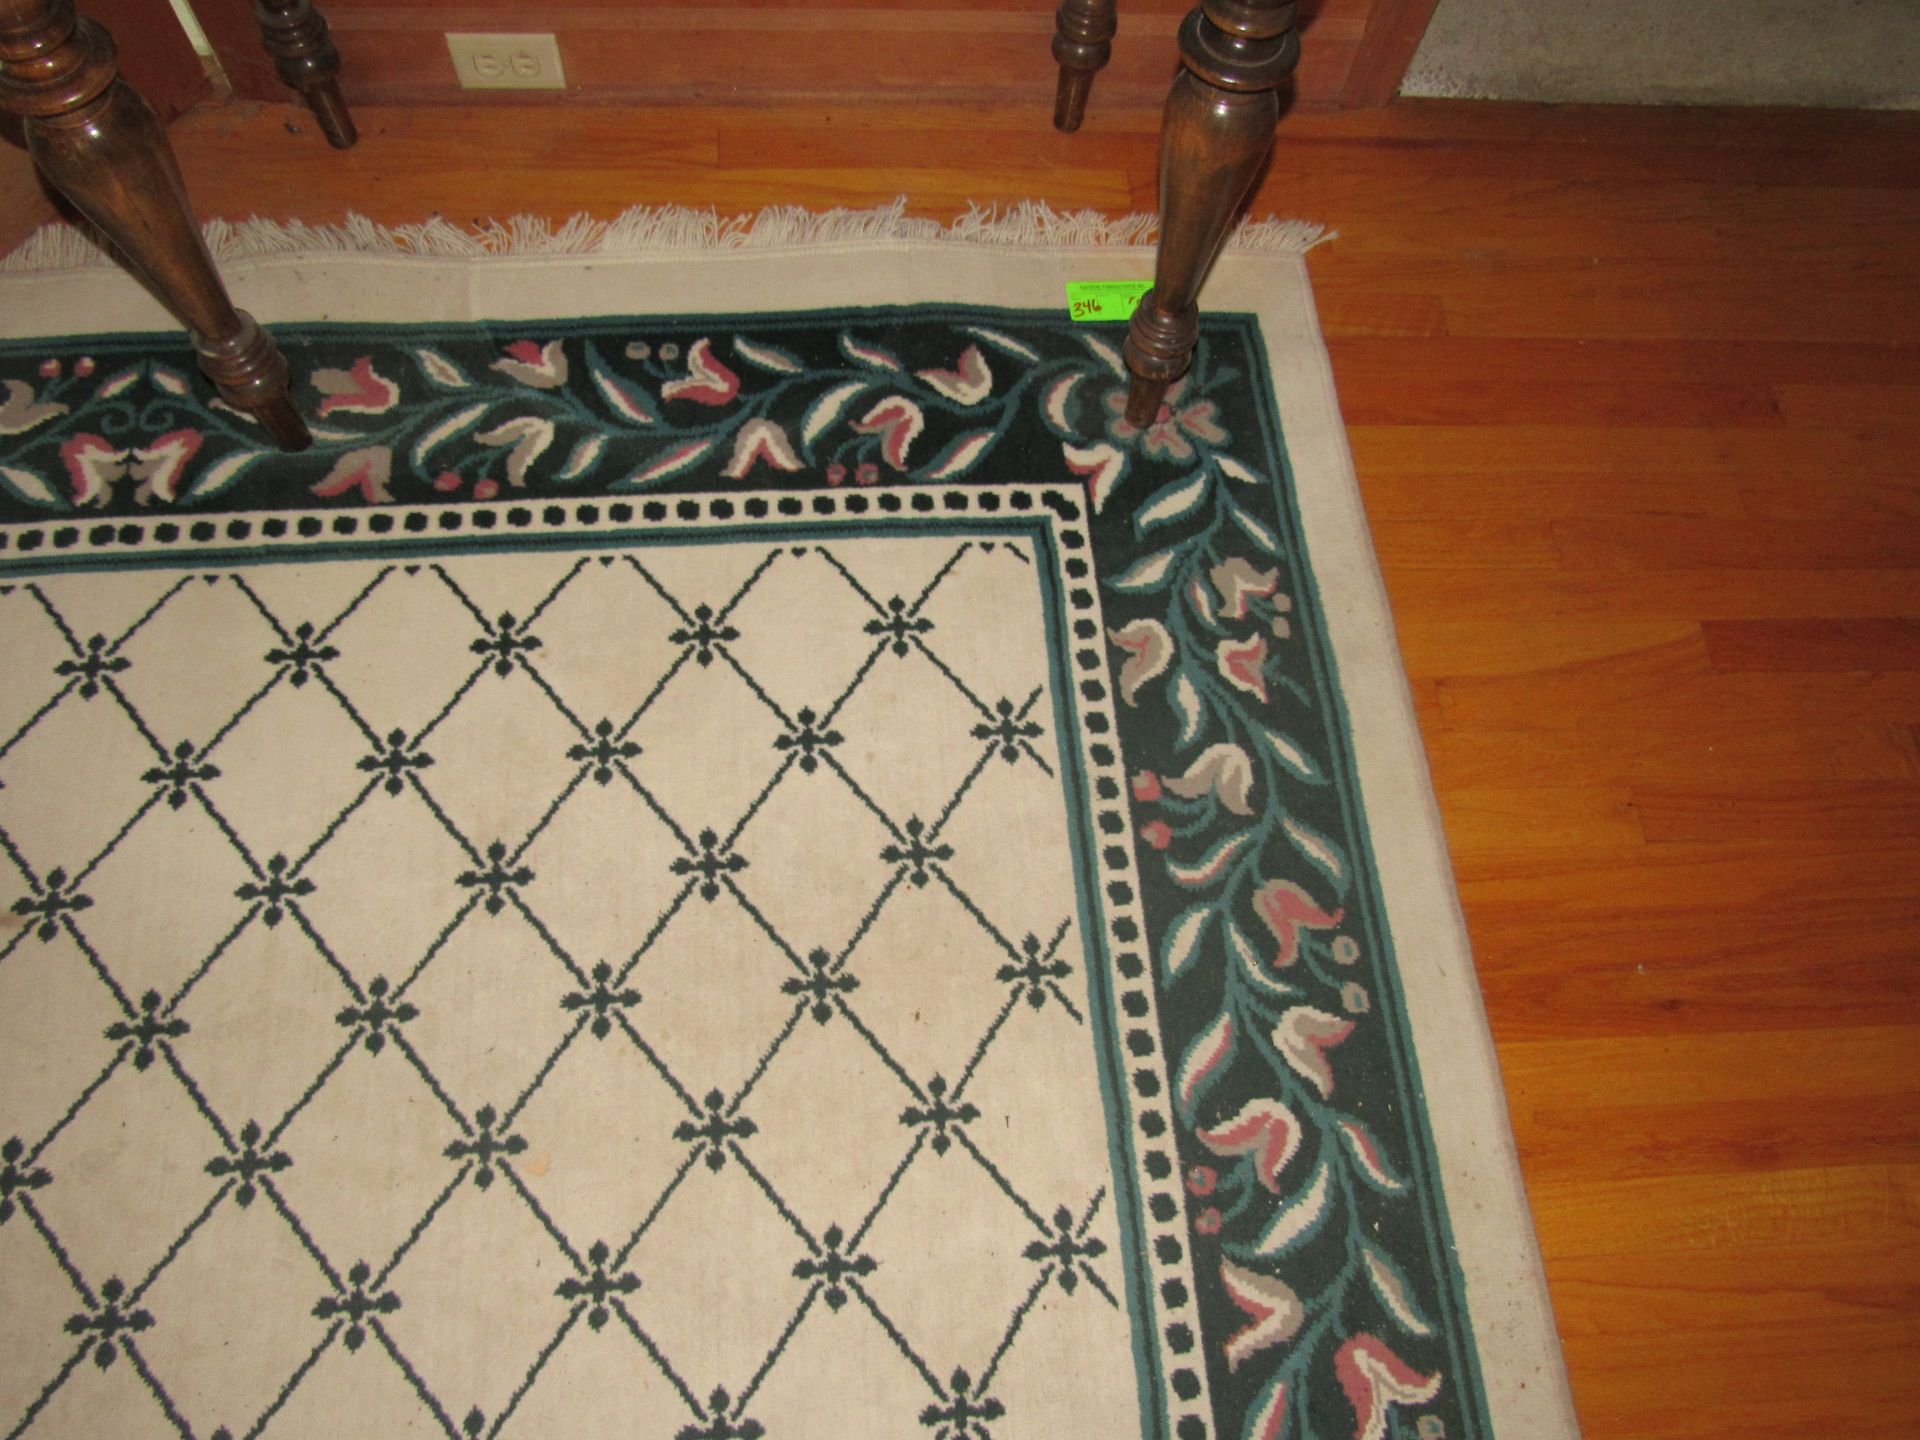 Area rug, size 8' x 12'